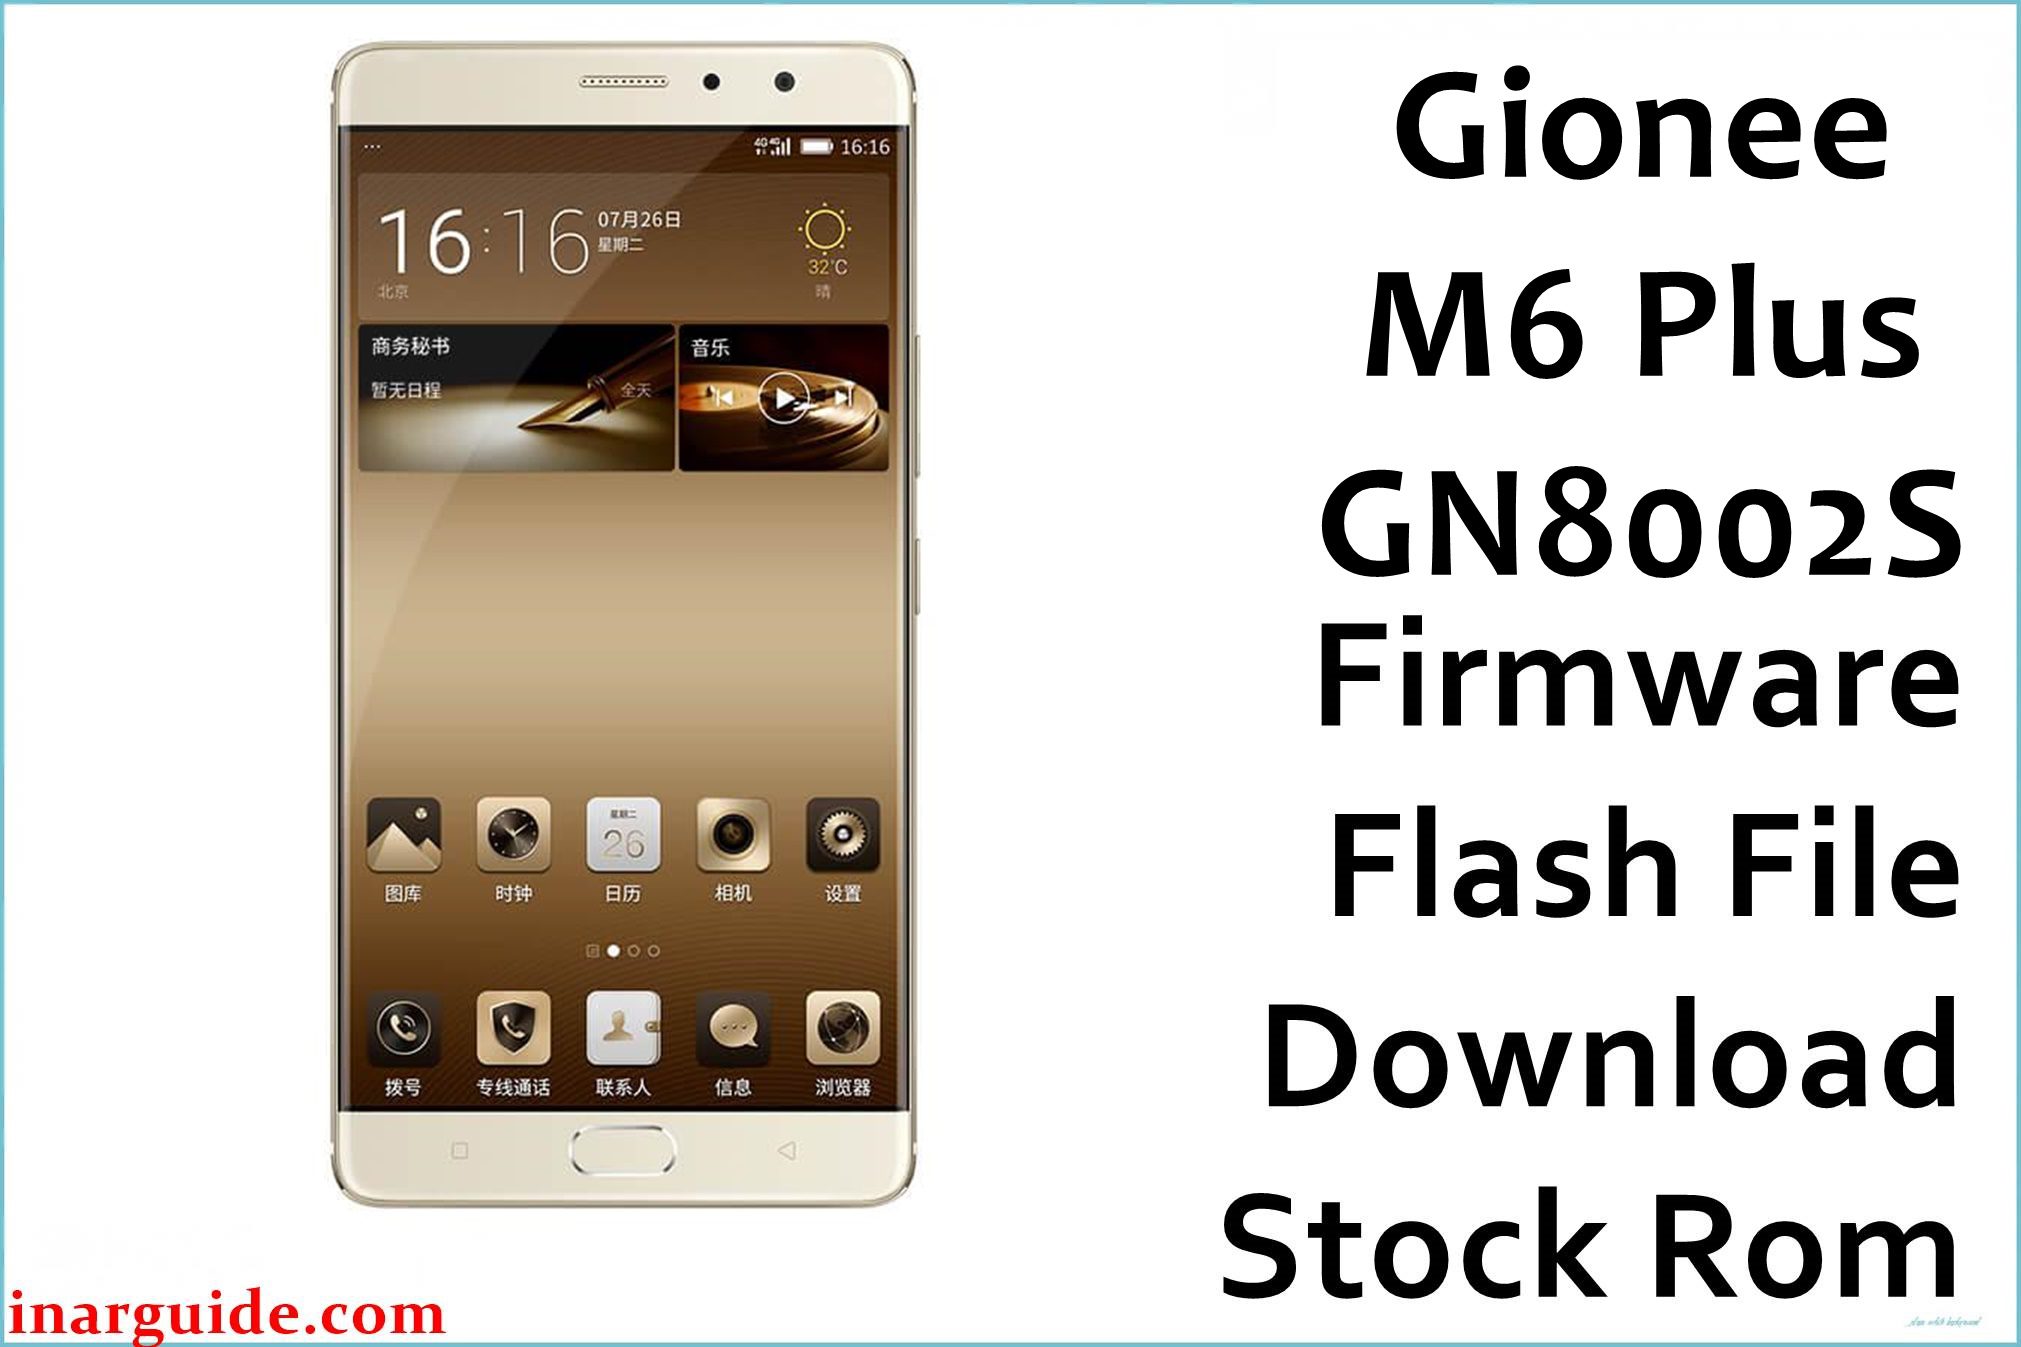 Gionee M6 Plus GN8002S